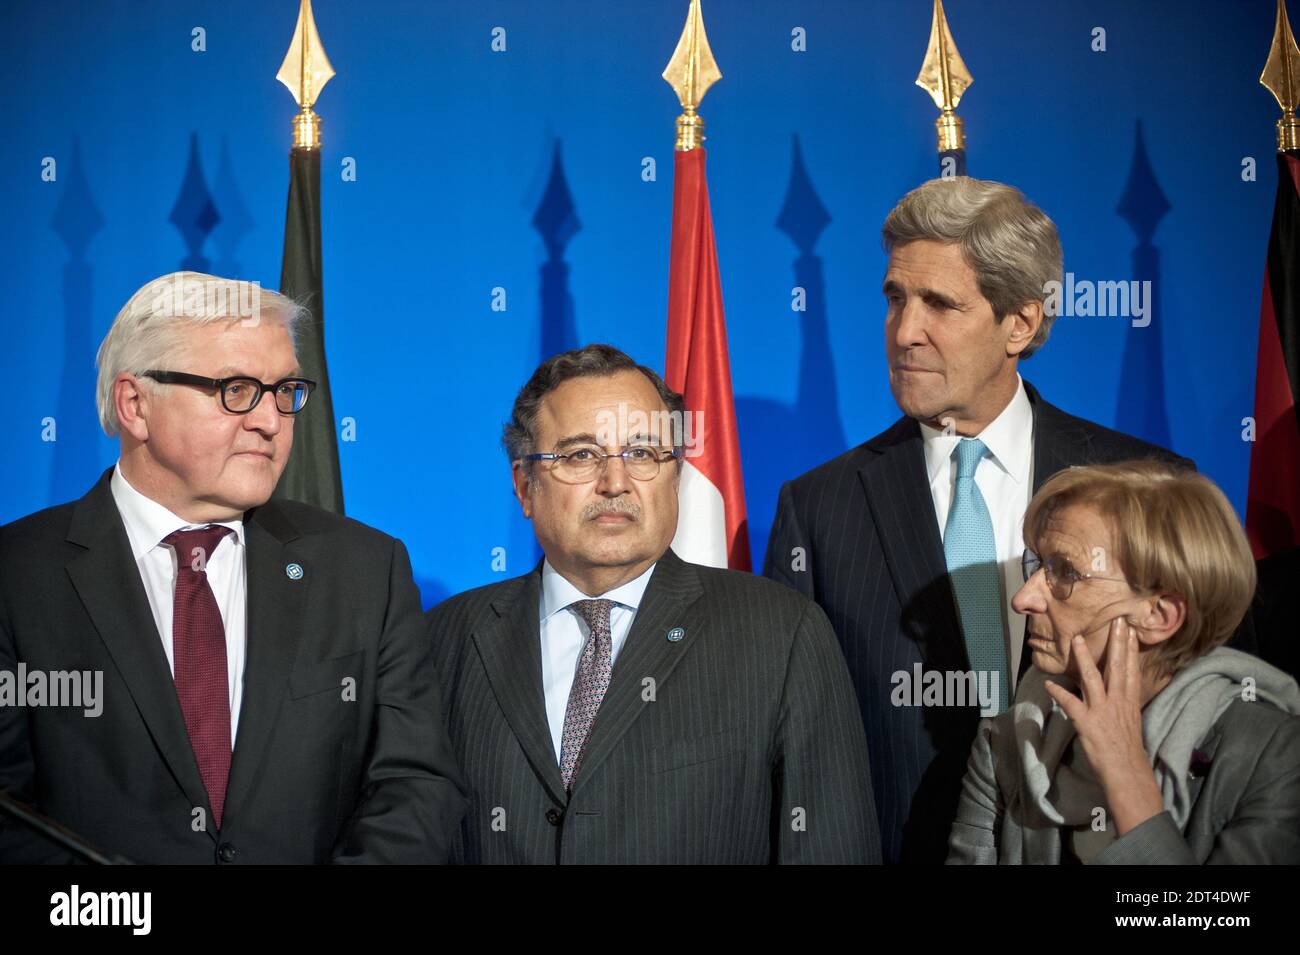 (L to R) Frank-Walter Steinmeier (Germany), Nabil Fahmy (Egypt), John Kerry (USA), Emma Bonino (Italy) pictured during a family photo at a press conference in Paris. The eleven countries of the Group of Friends of Syria met in Paris to convince the opposition to participate in Geneva-2. Laurent Fabius chaired the ministerial meeting, attended by the President of the Syrian Coalition, Ahmed Al-Jarba. Ministry of Foreign Affairs, in Paris, France, on January 12, 2014. Photo by Nicolas Messyasz/ABACAPRESS.COM Stock Photo